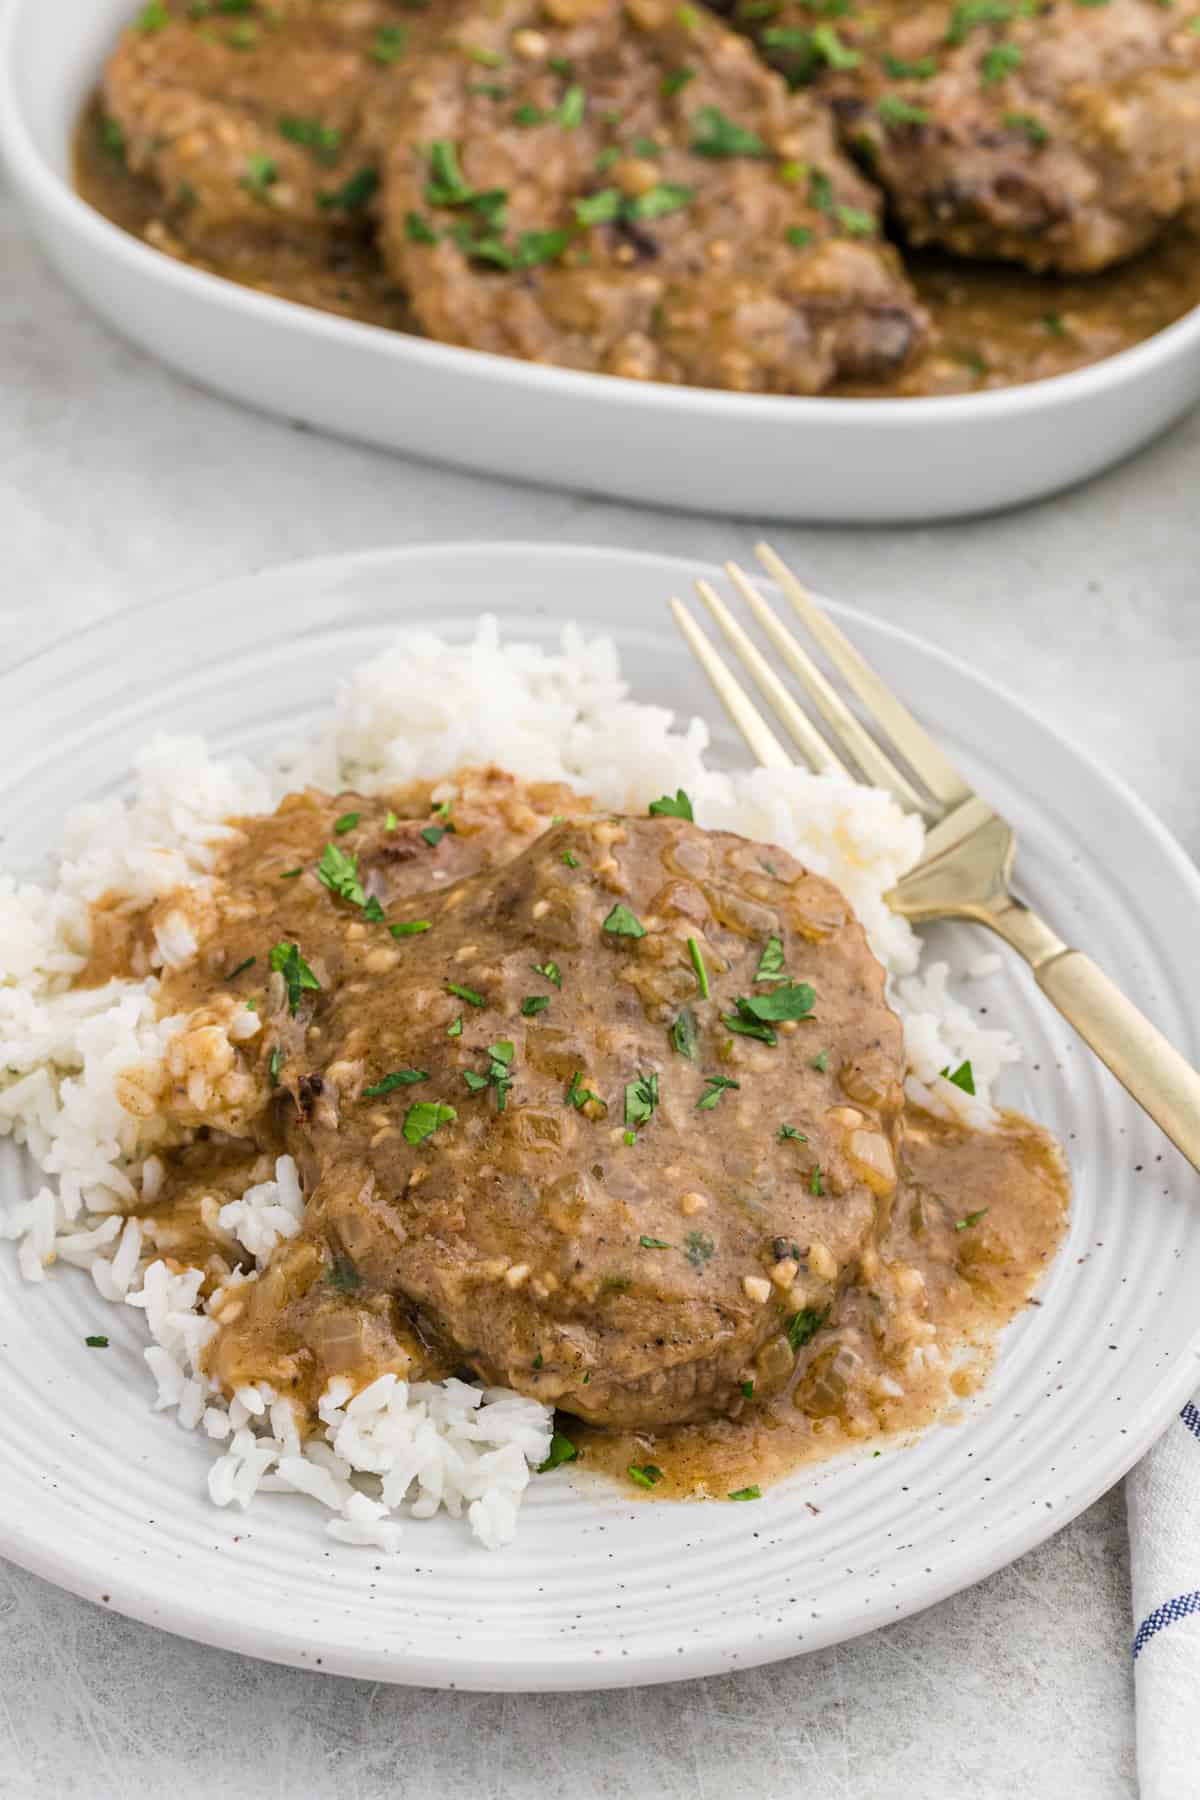 Smothered round steak over white rice with a gold fork on a dinner plate.